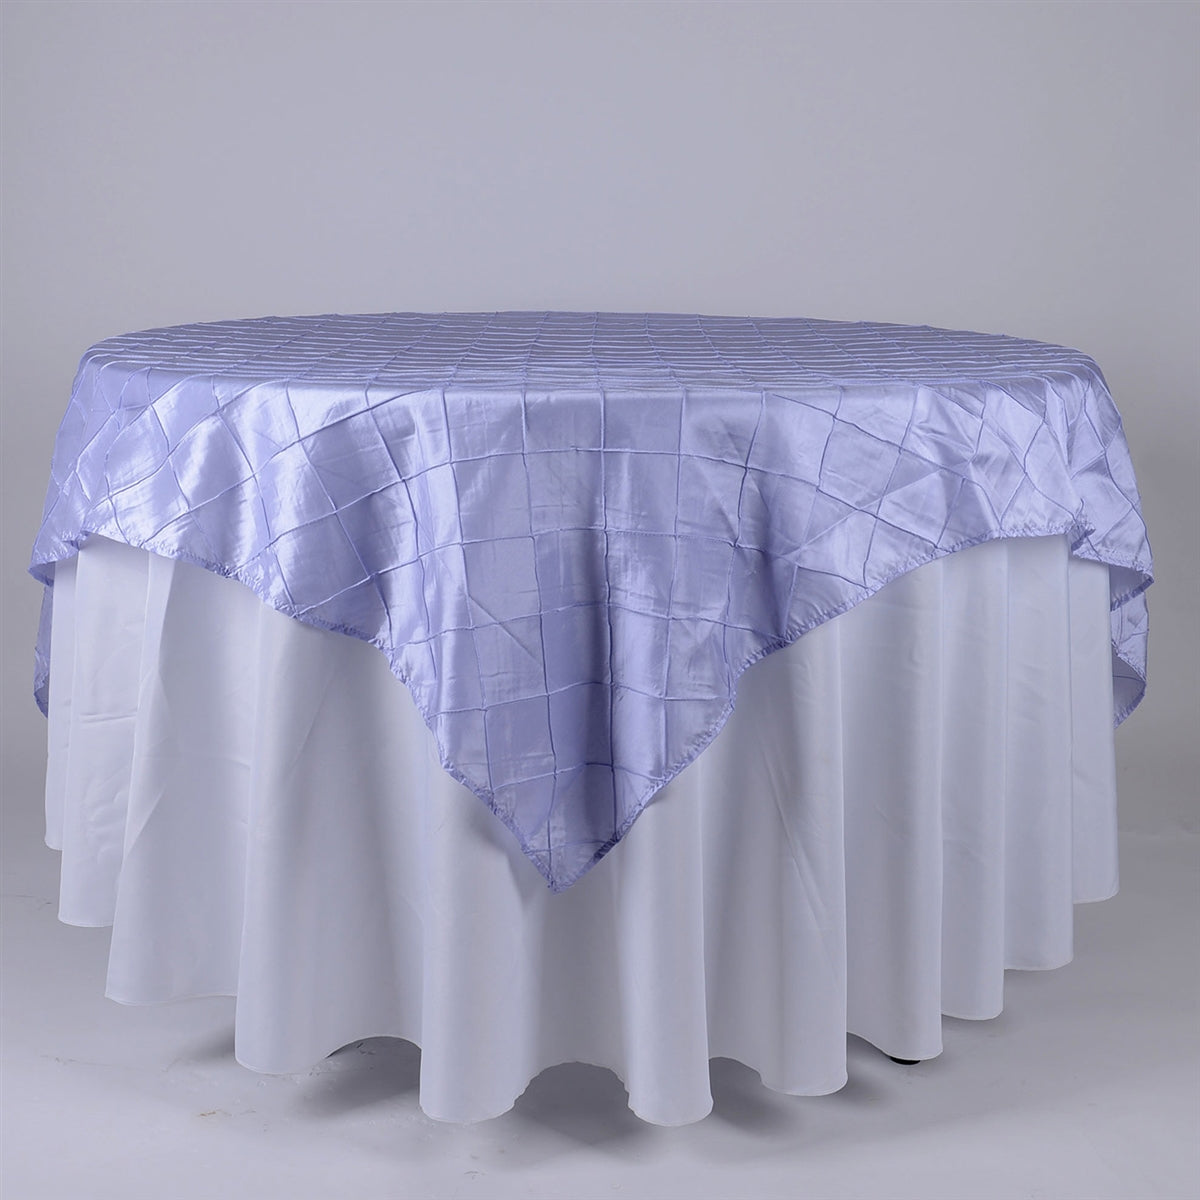 Lavender - 72 inch x 72 inch Square Pintuck Satin Overlay